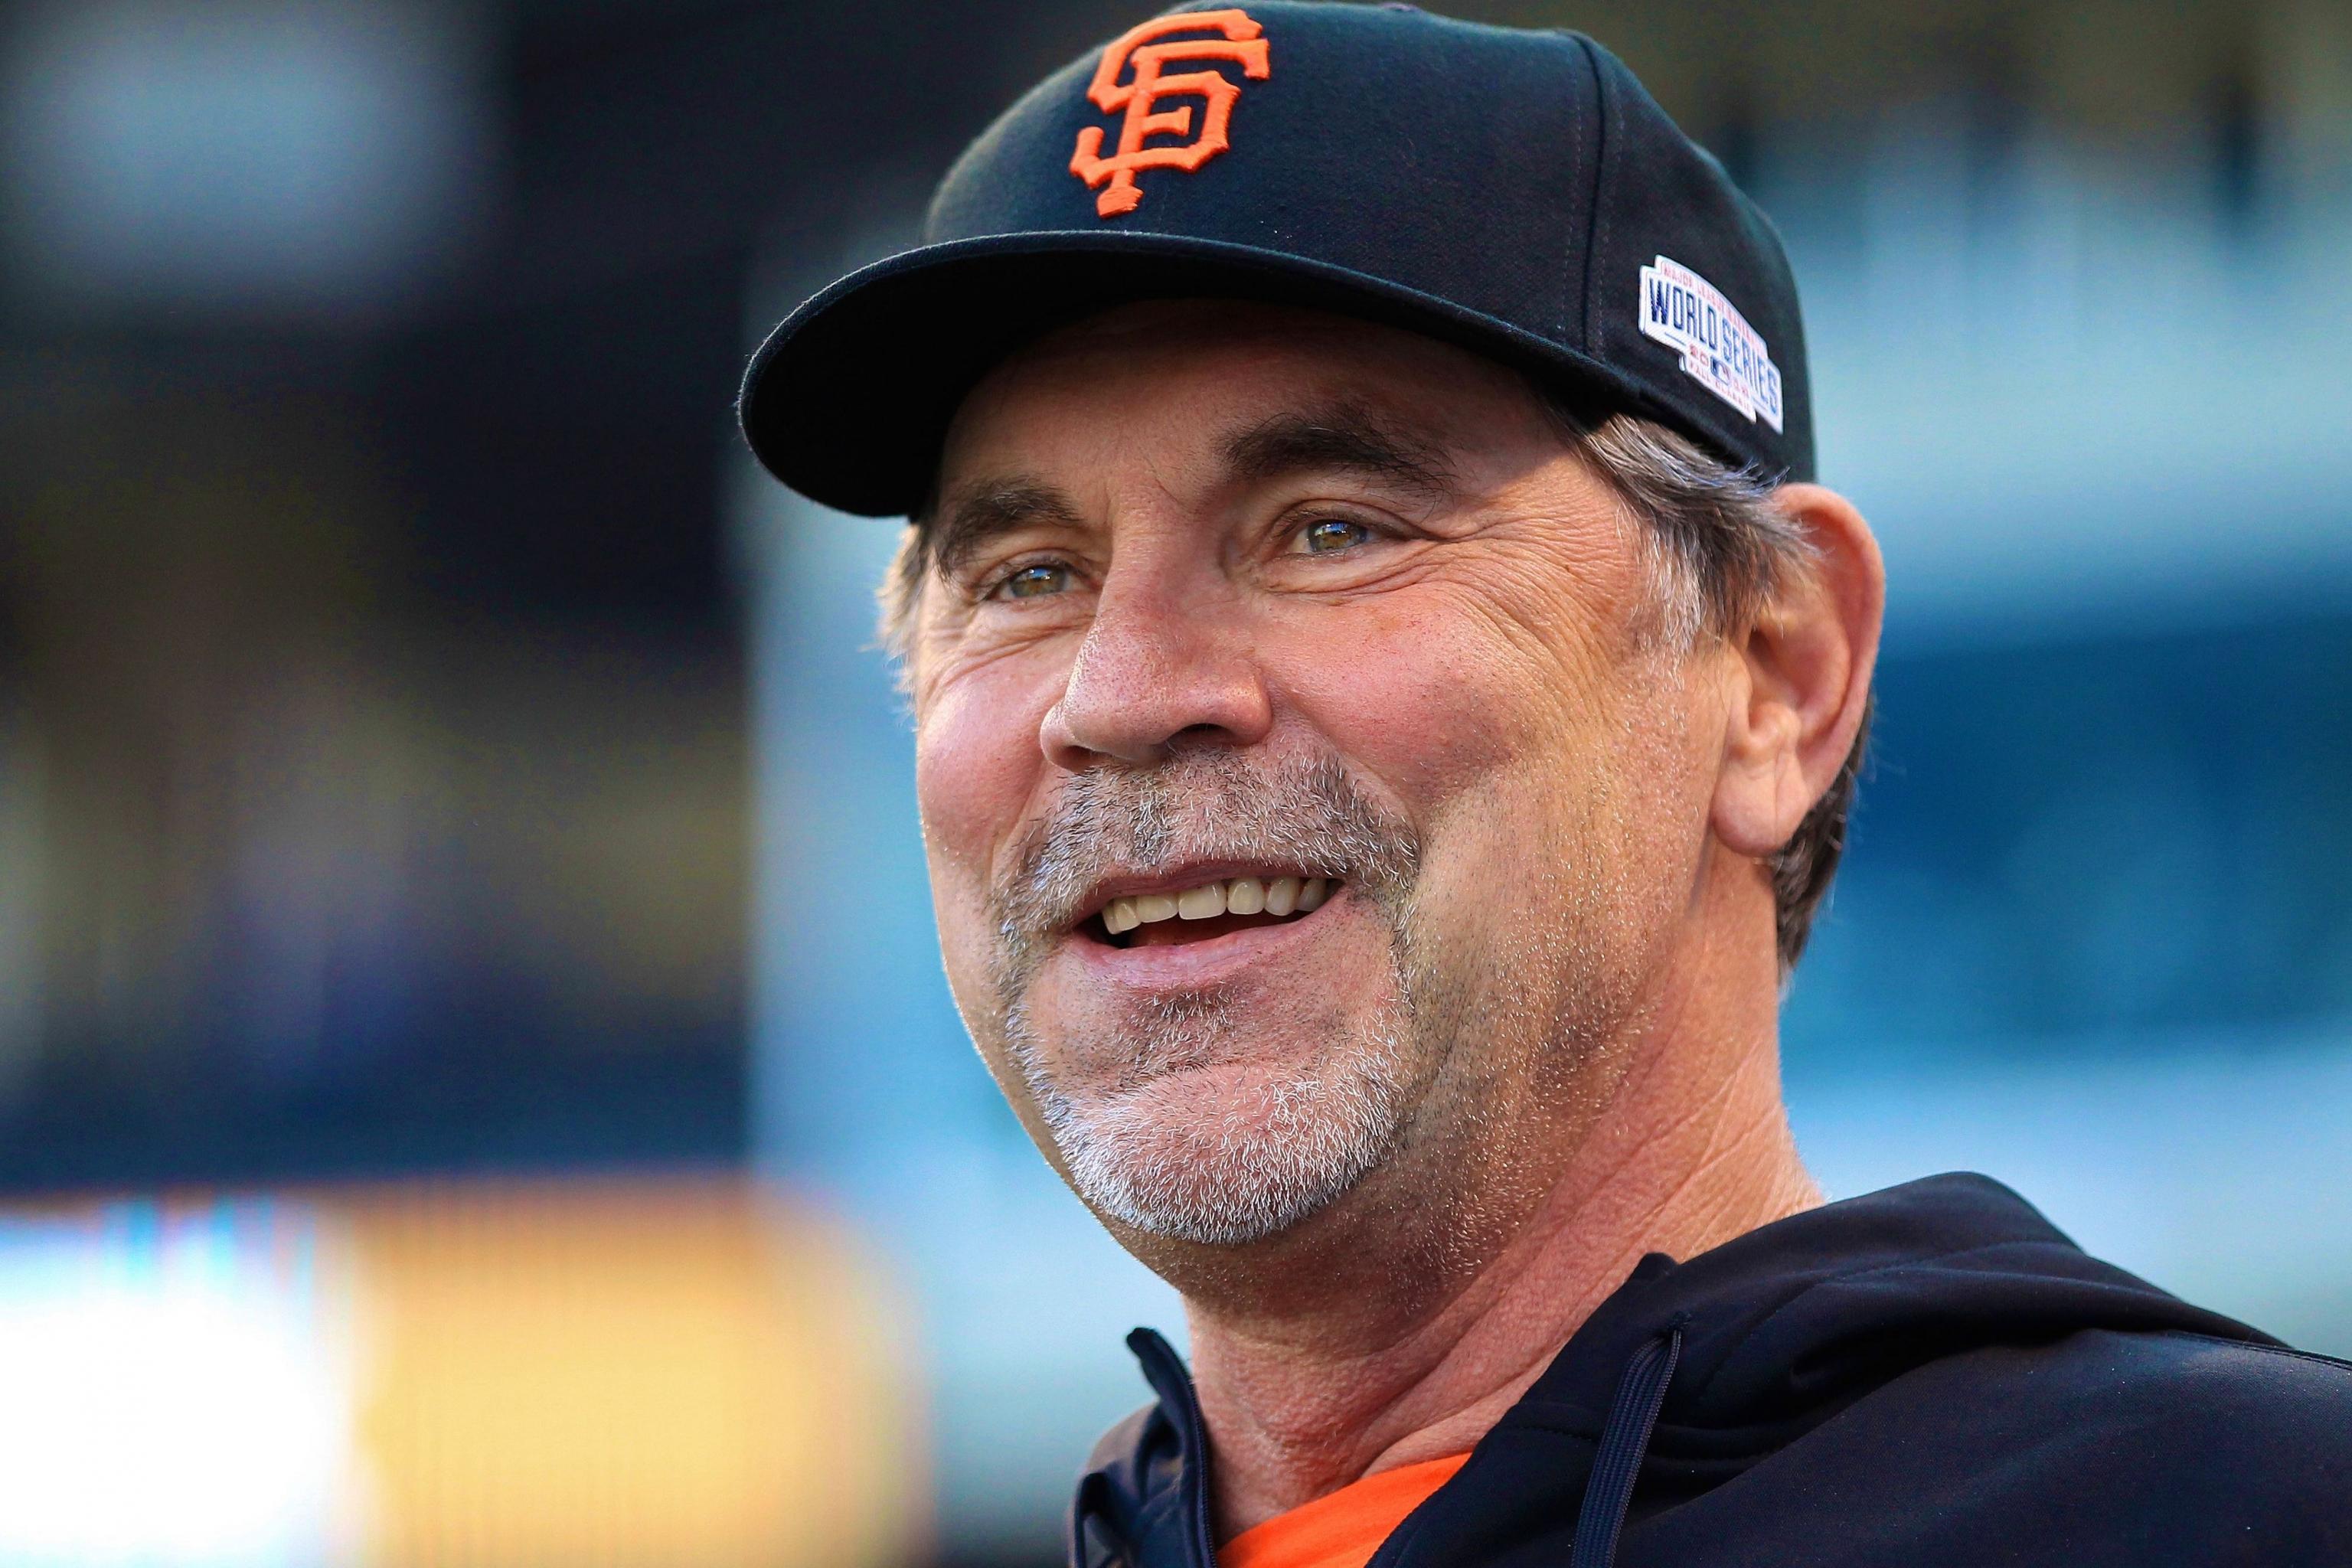 Bruce Bochy Manager 2007 - Present